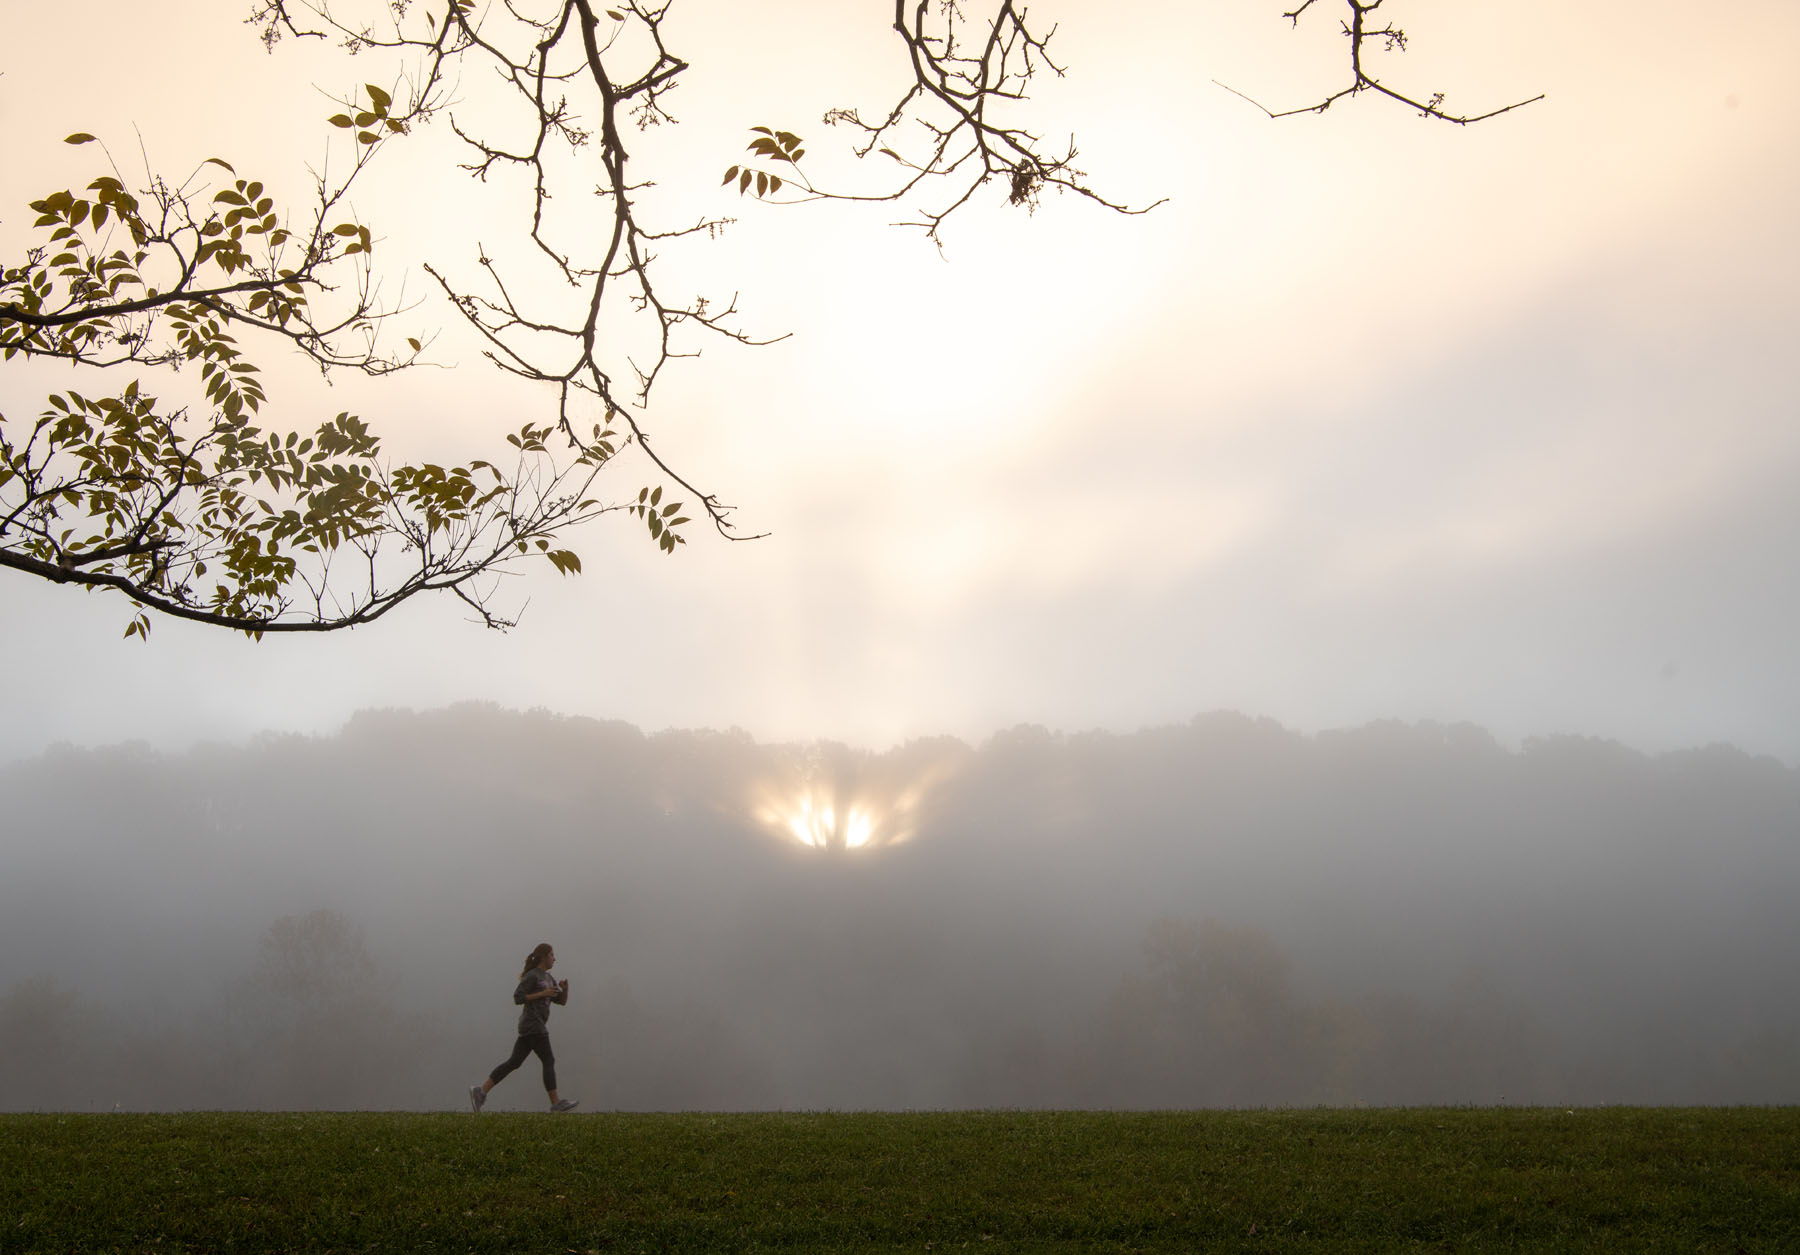 The sun rises over a foggy Hocking River as a jogger proceeds down the bike path parallel to the river